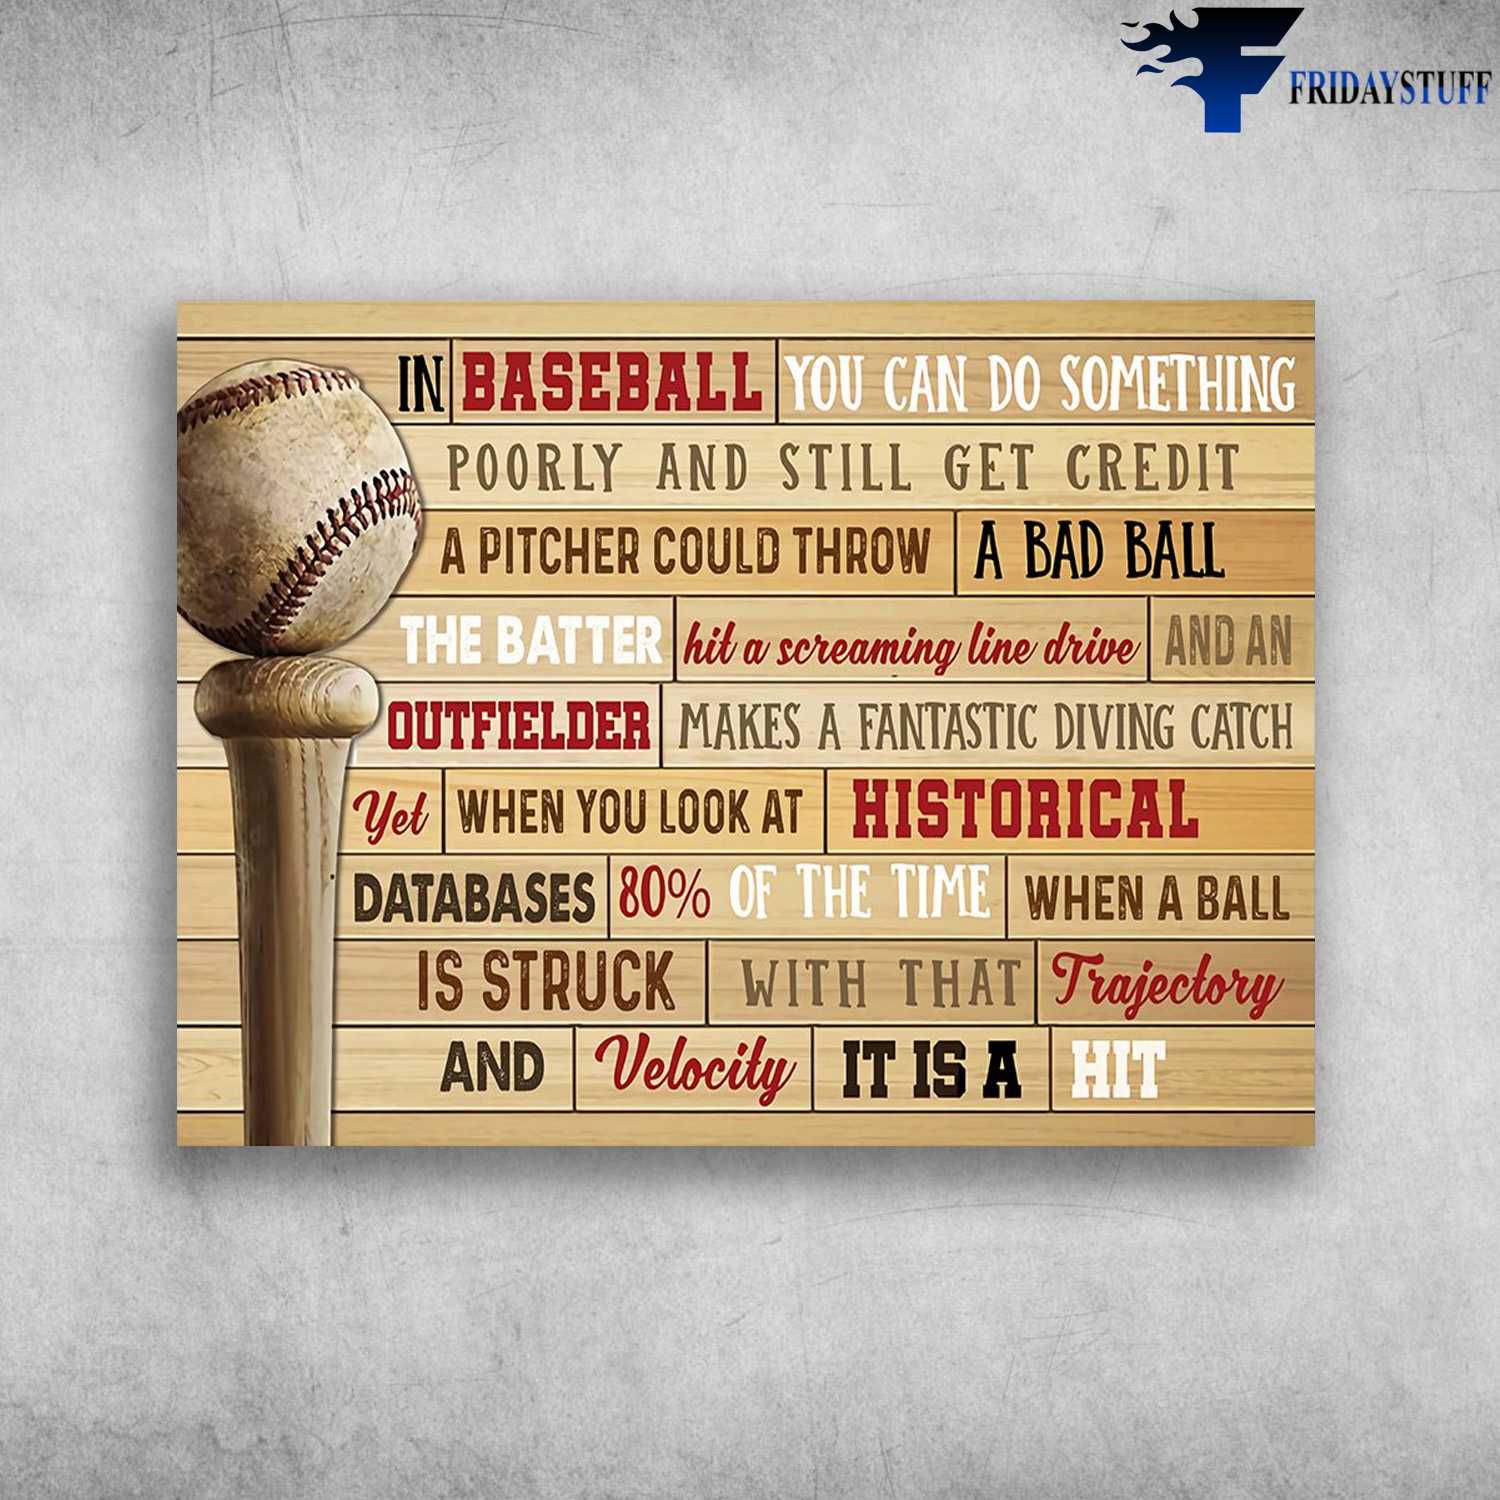 Baseball Canvas - In Baseball, You Cando Something, Poorly And Still Get Credit, A Pitcher Could Throw And Bad Ball, The Batter, Hit A Screaming Line Drive, And An Putfielder